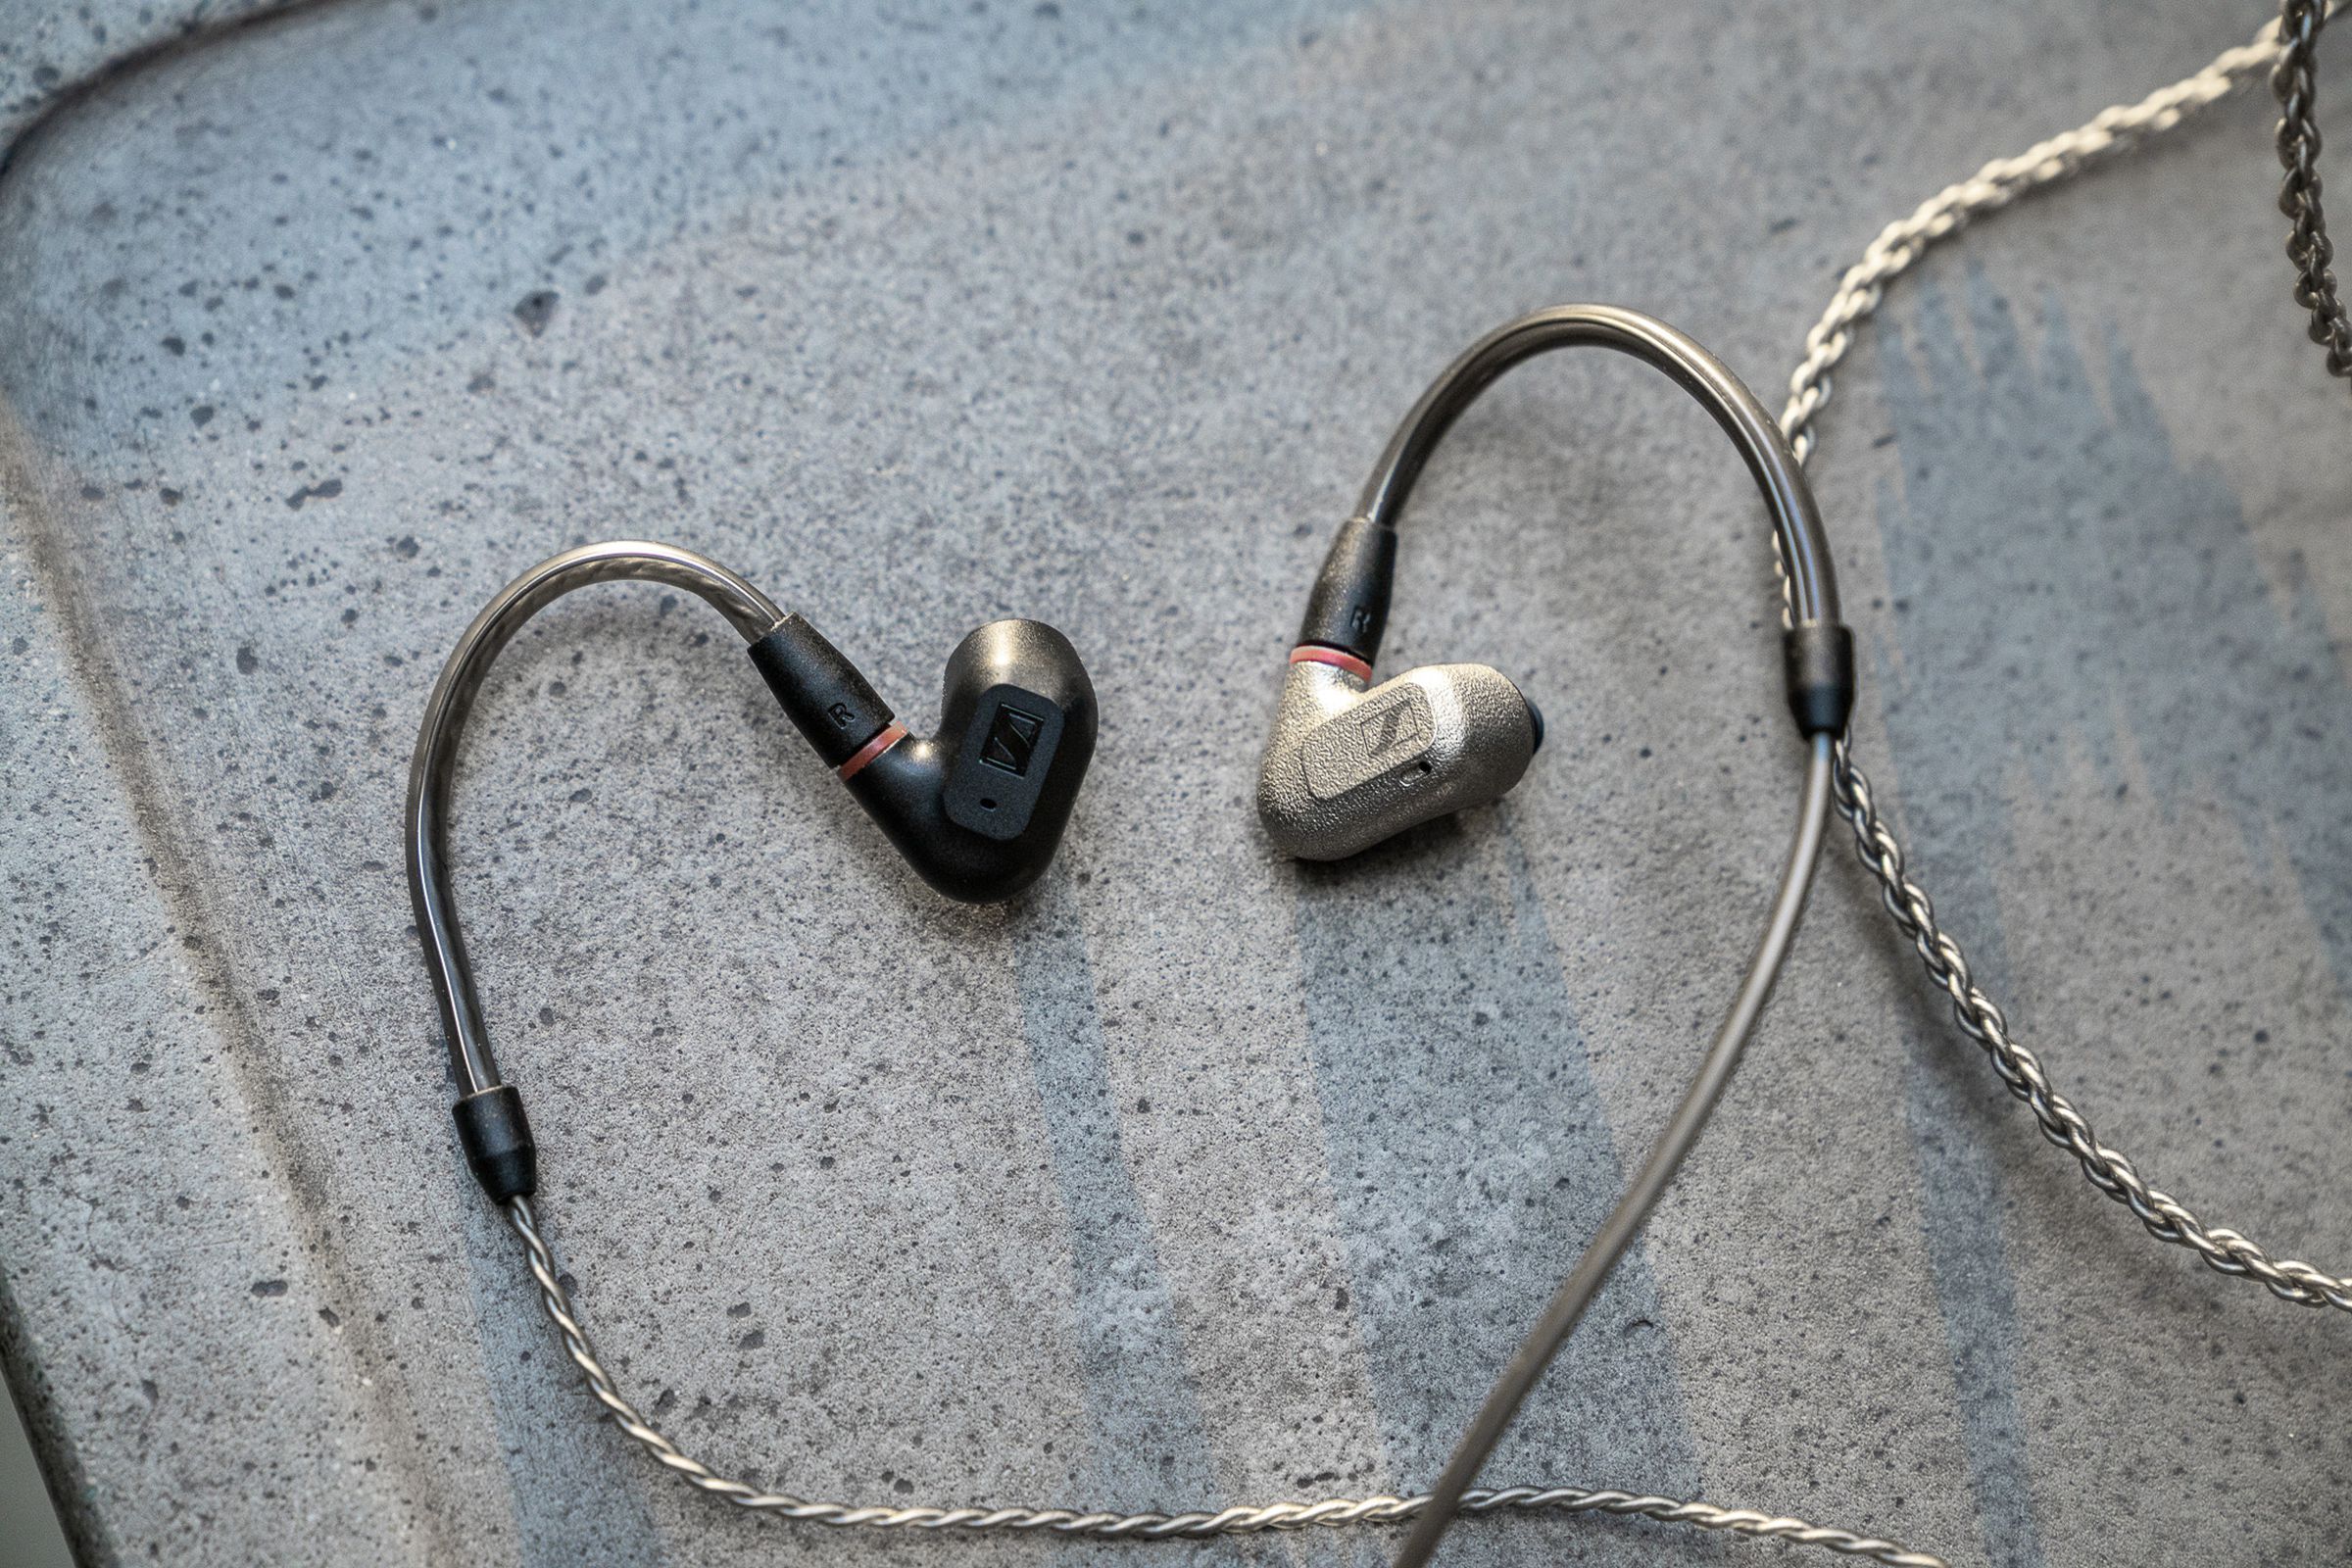 A photo of Sennheiser's IE 200 earbuds next to the company's IE 600 earbuds.